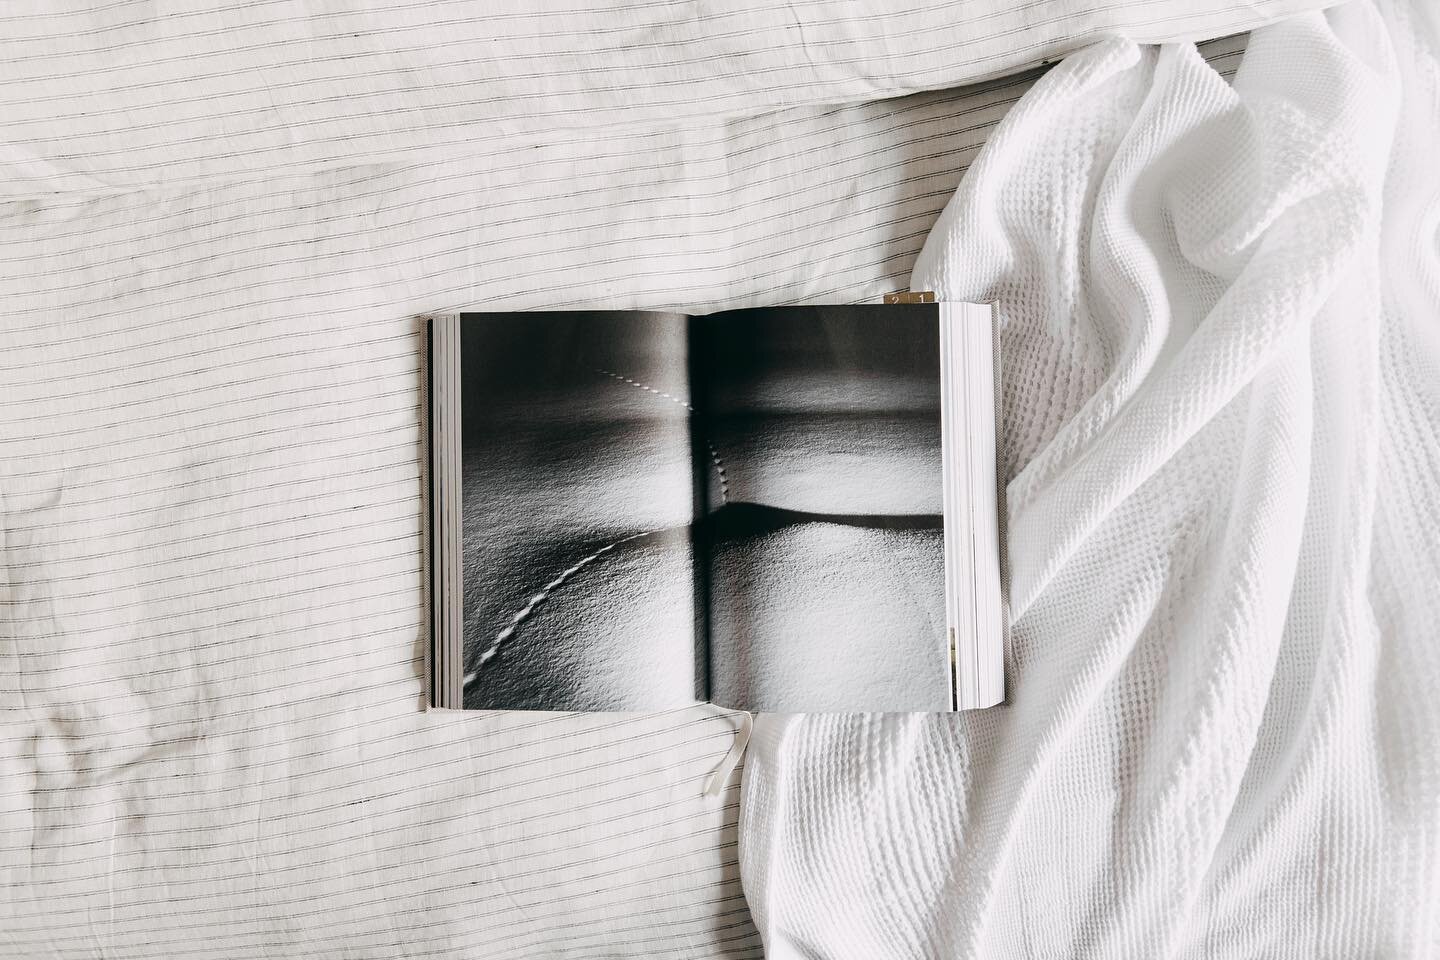 Dreaming of cozy winter afternoons inside tucked between @abode_living linens and a deeply engaging photography book.